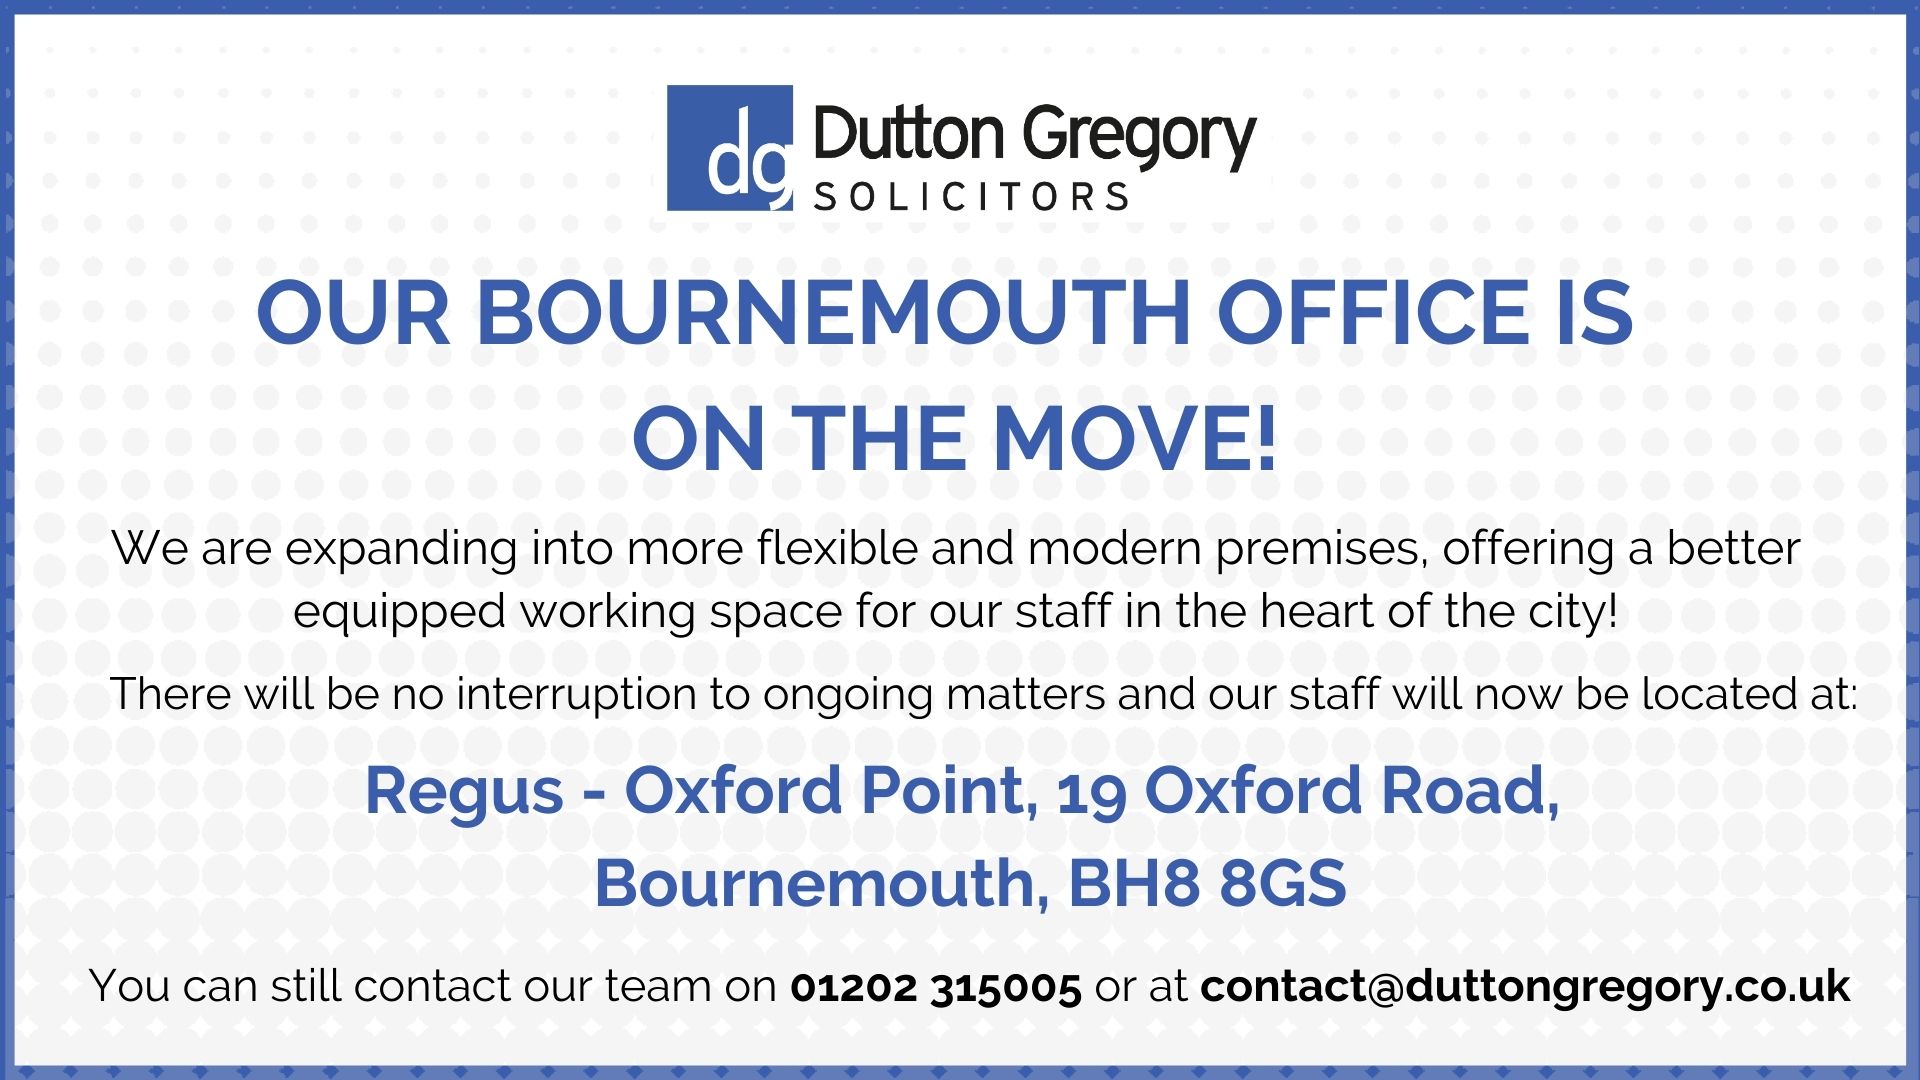 Change of Scenery for Dutton Gregorys Bournemouth Team